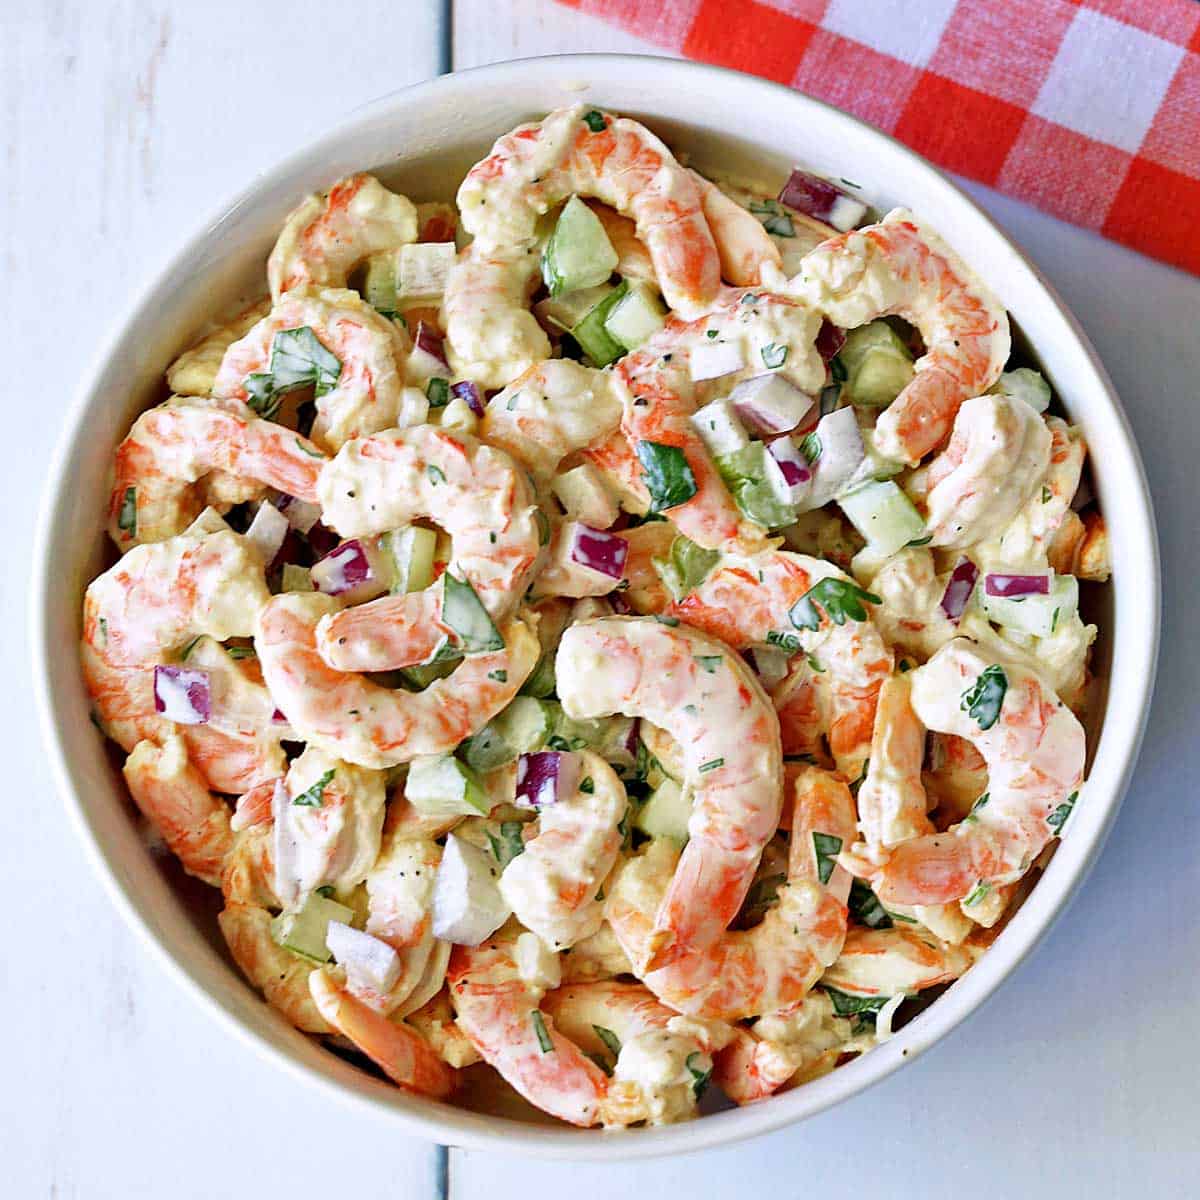 Shrimp salad is served in a white bowl with a napkin.